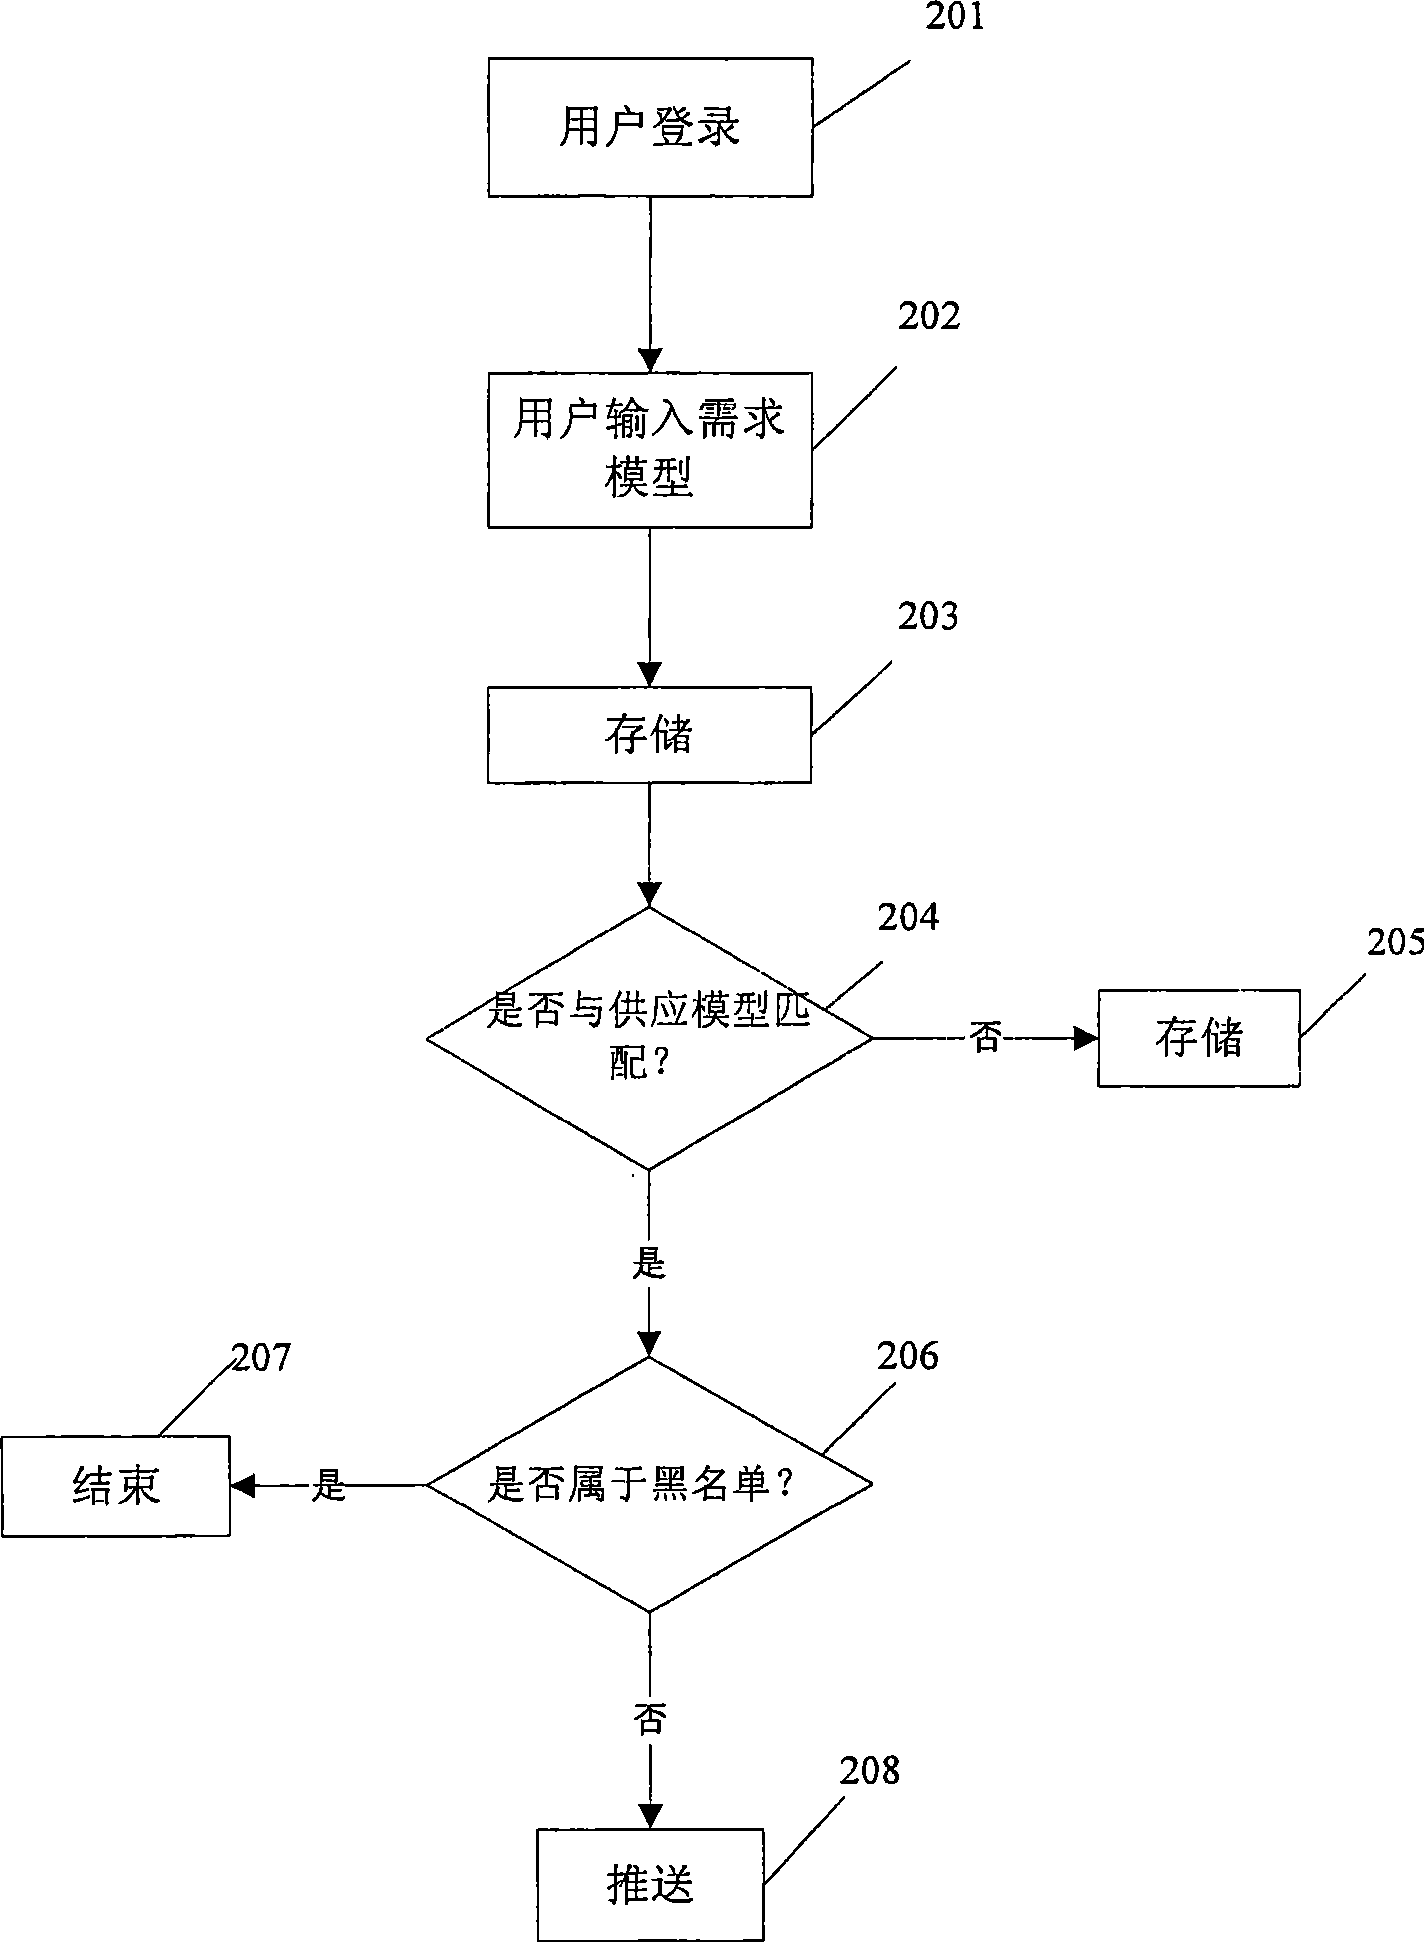 Method and system for information pushing in mobile communication network